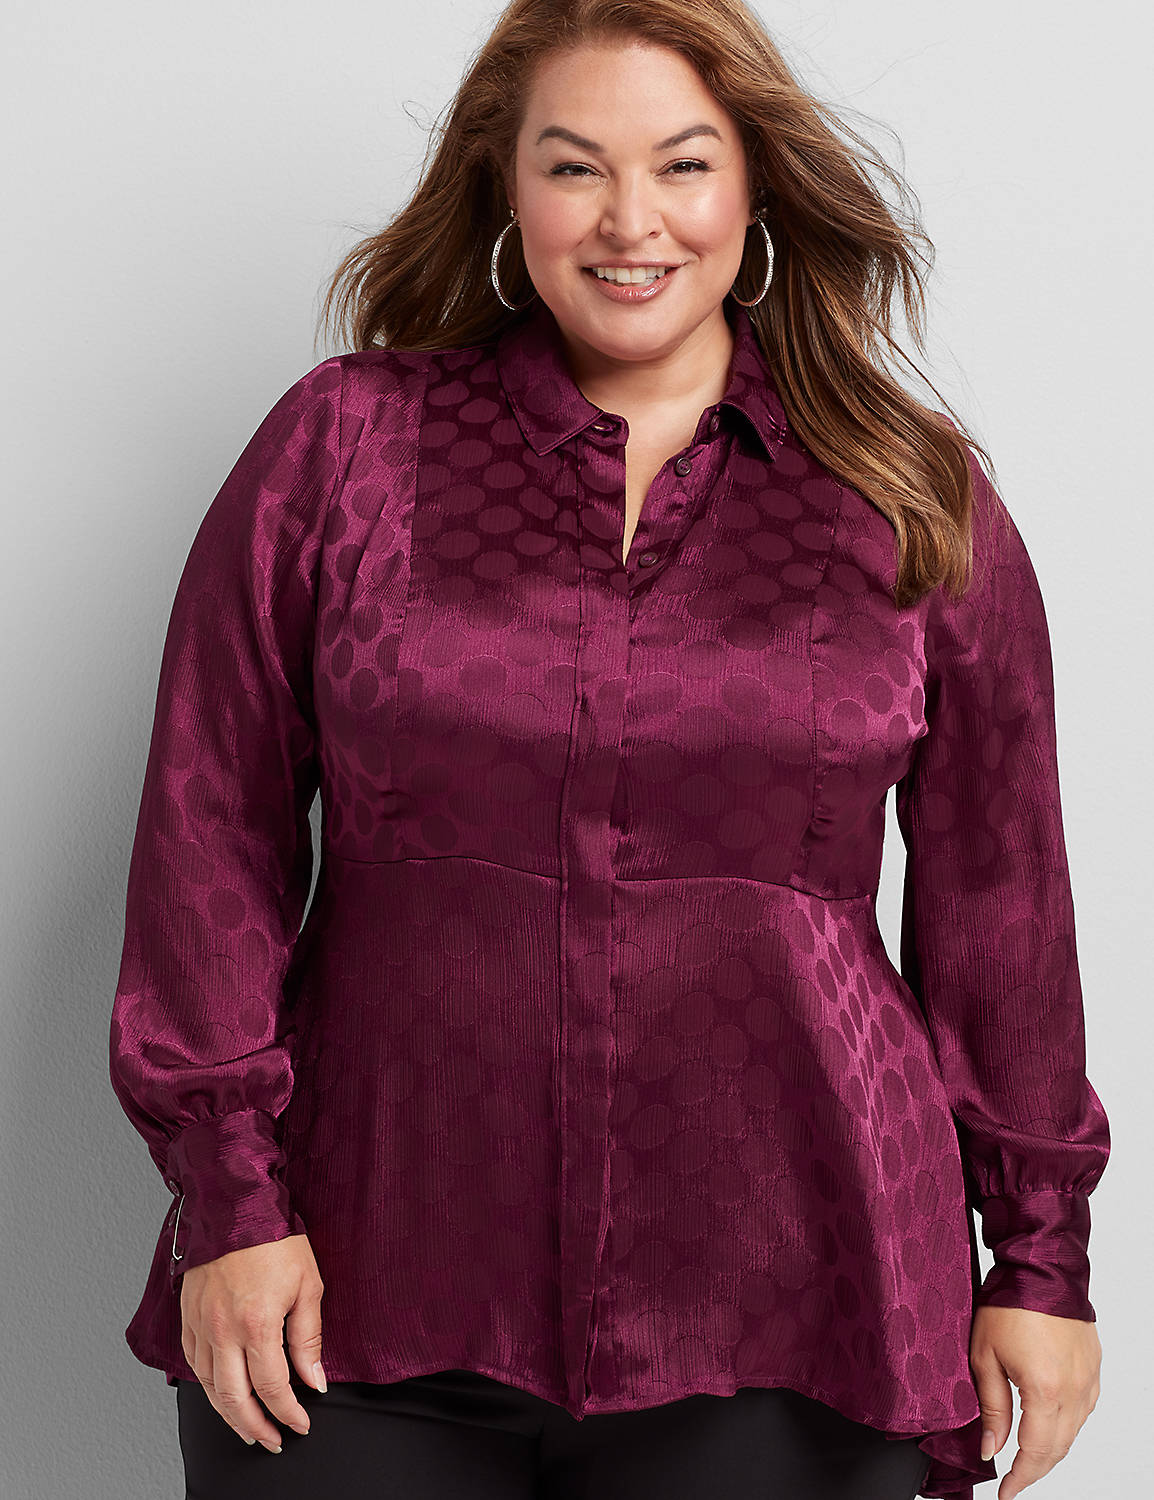 Long Sleeve Button Front High Low Tunic Novelty Jacquard Blouse 1114689:PANTONE Pickled Beet:14 Product Image 1